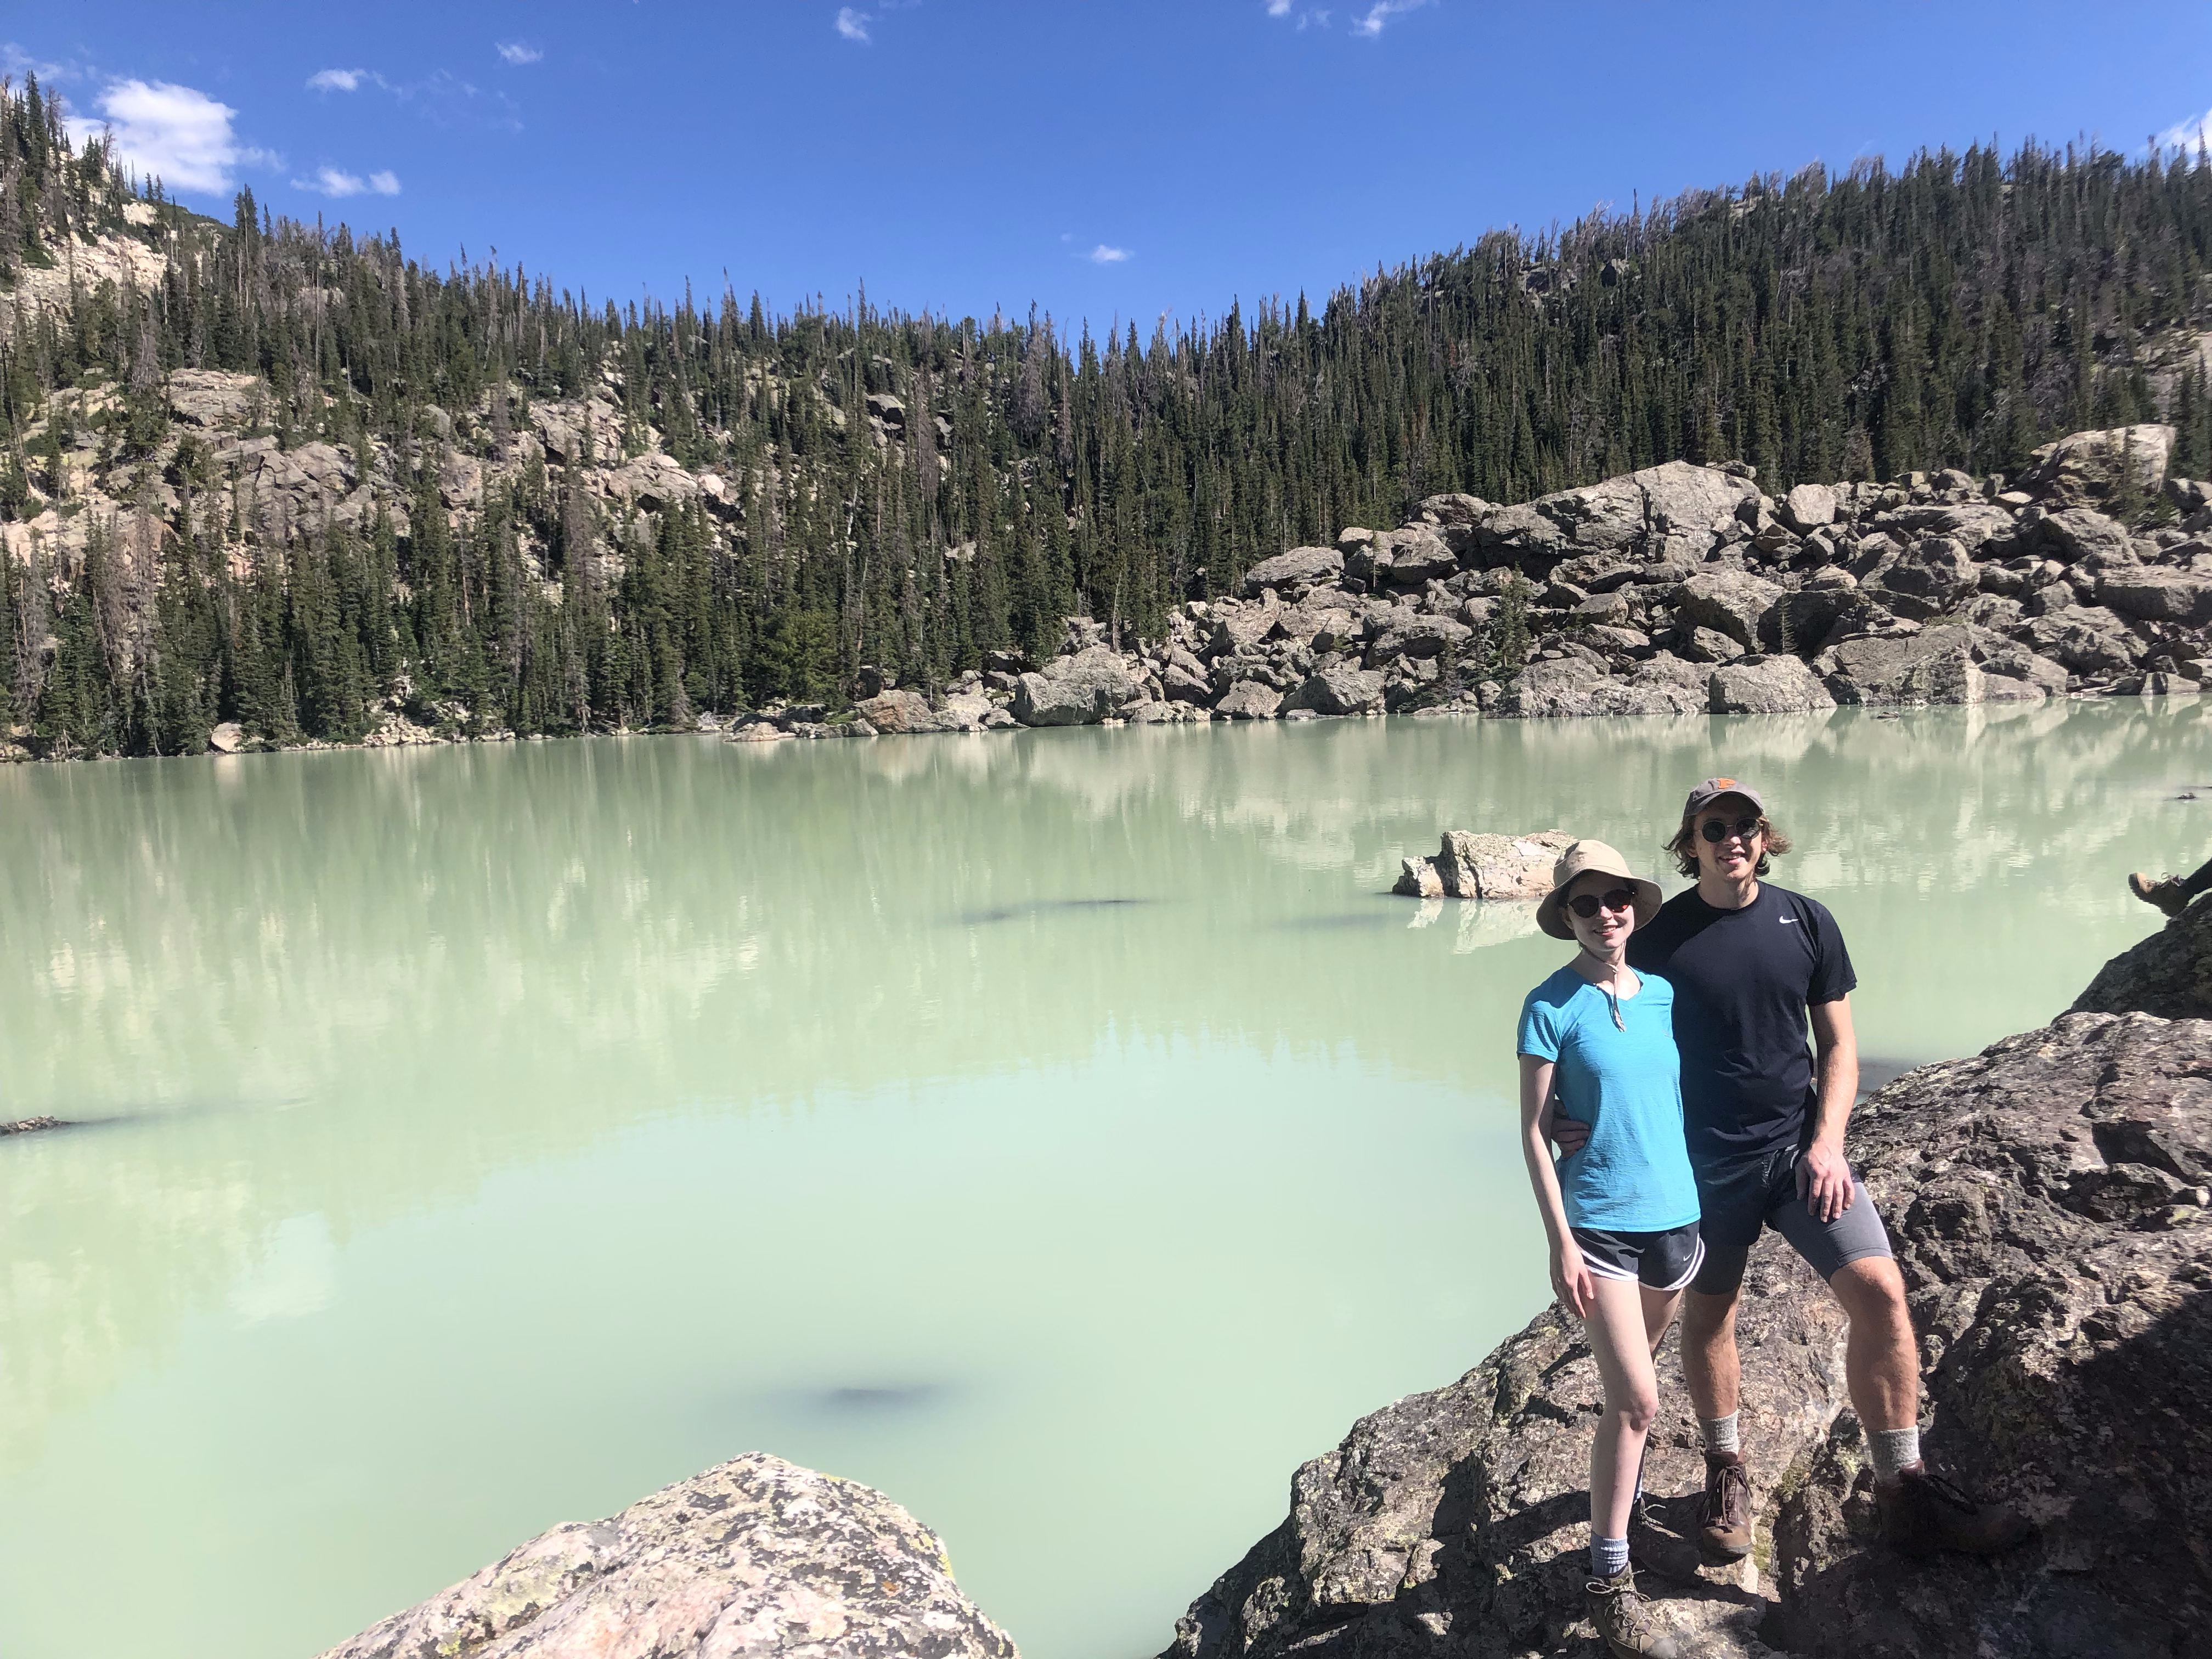 A man and woman stand in front of a pale green lake surrounded by rocks and trees.